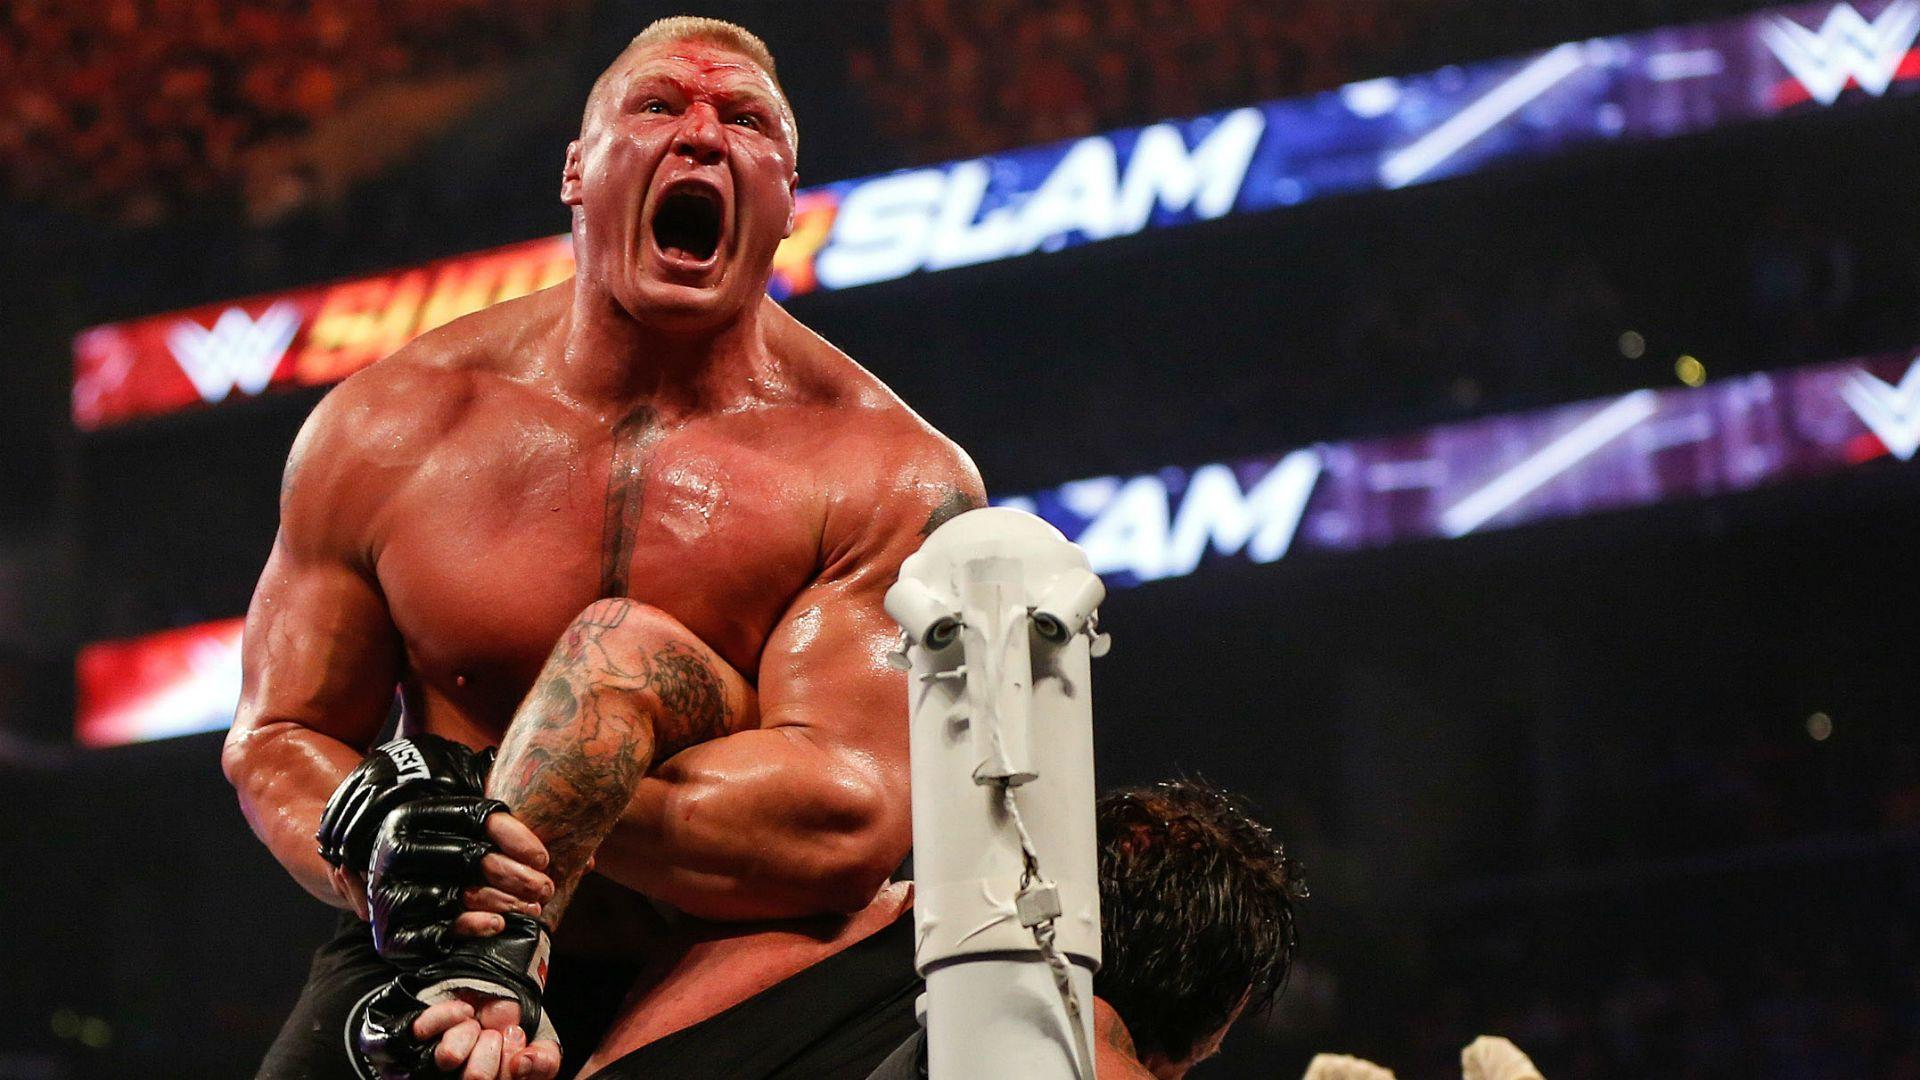 Brock Lesnar screenshots, images and pictures - Giant Bomb